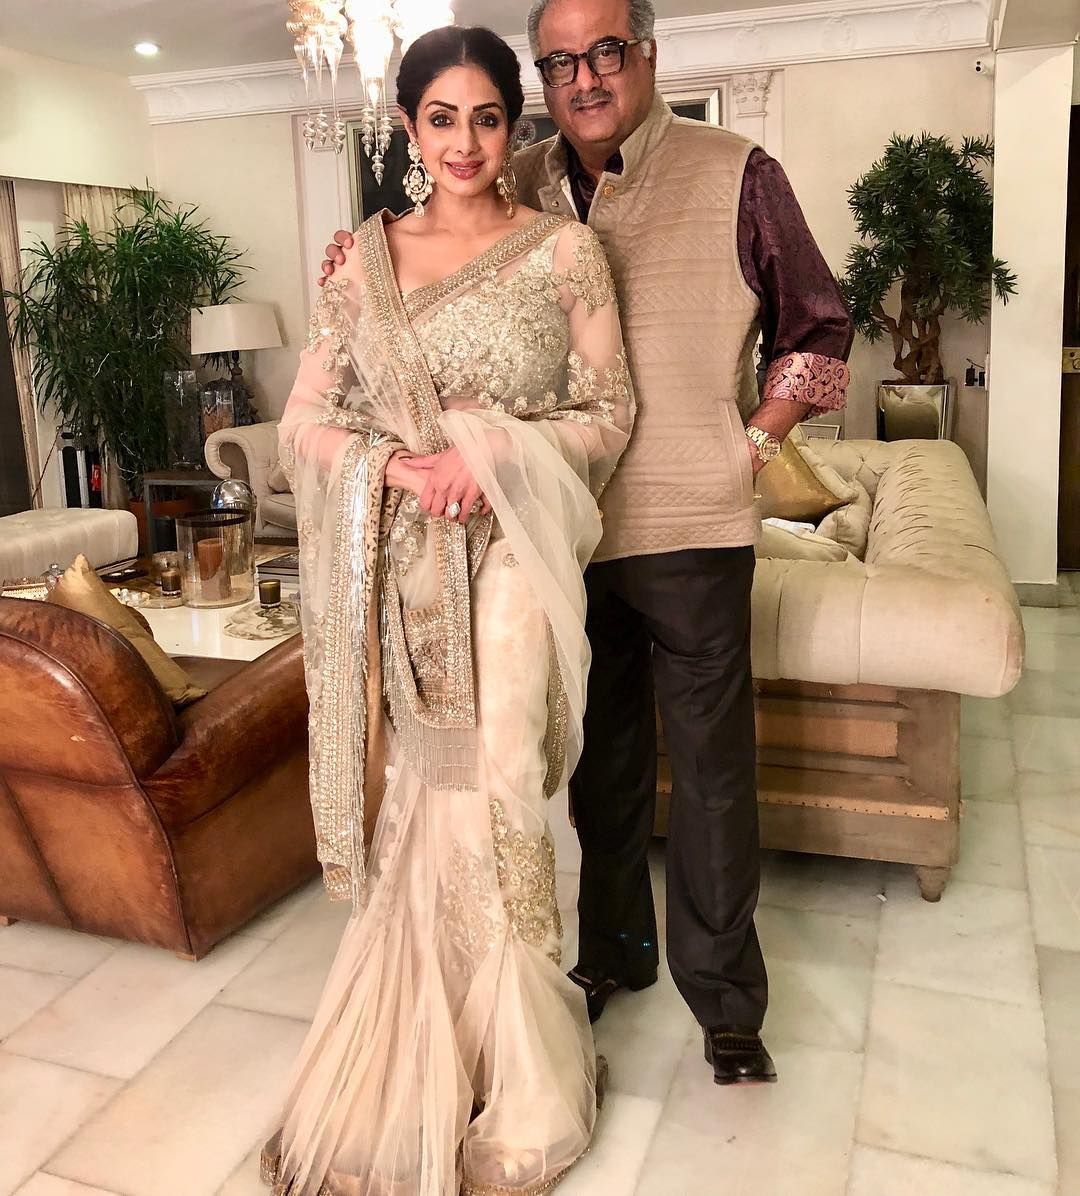 Boney Kapoor Writes An Emotional Note On Sridevi’s Birthday: ‘Missing You Lots Every Second Of The 900 Days You Left Us’